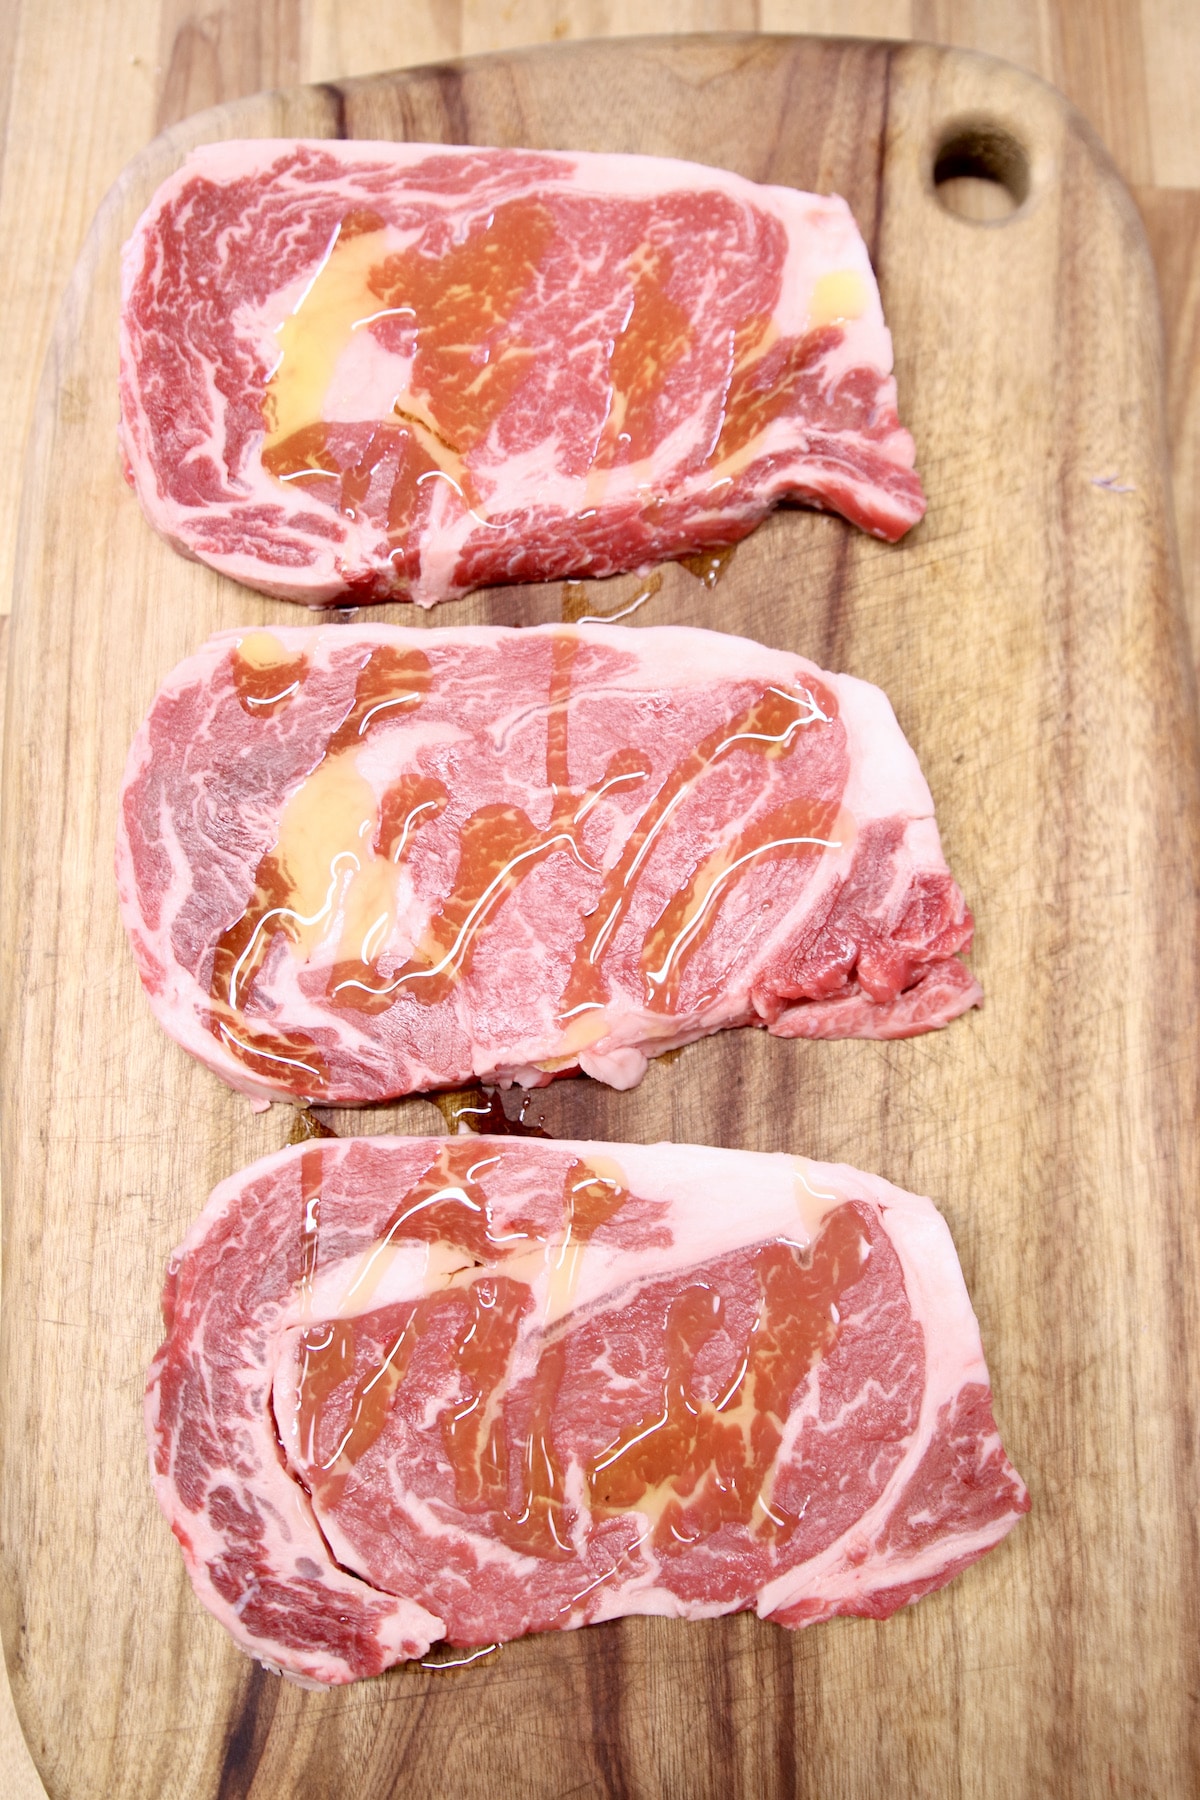 3 raw ribeyes drizzled with olive oil